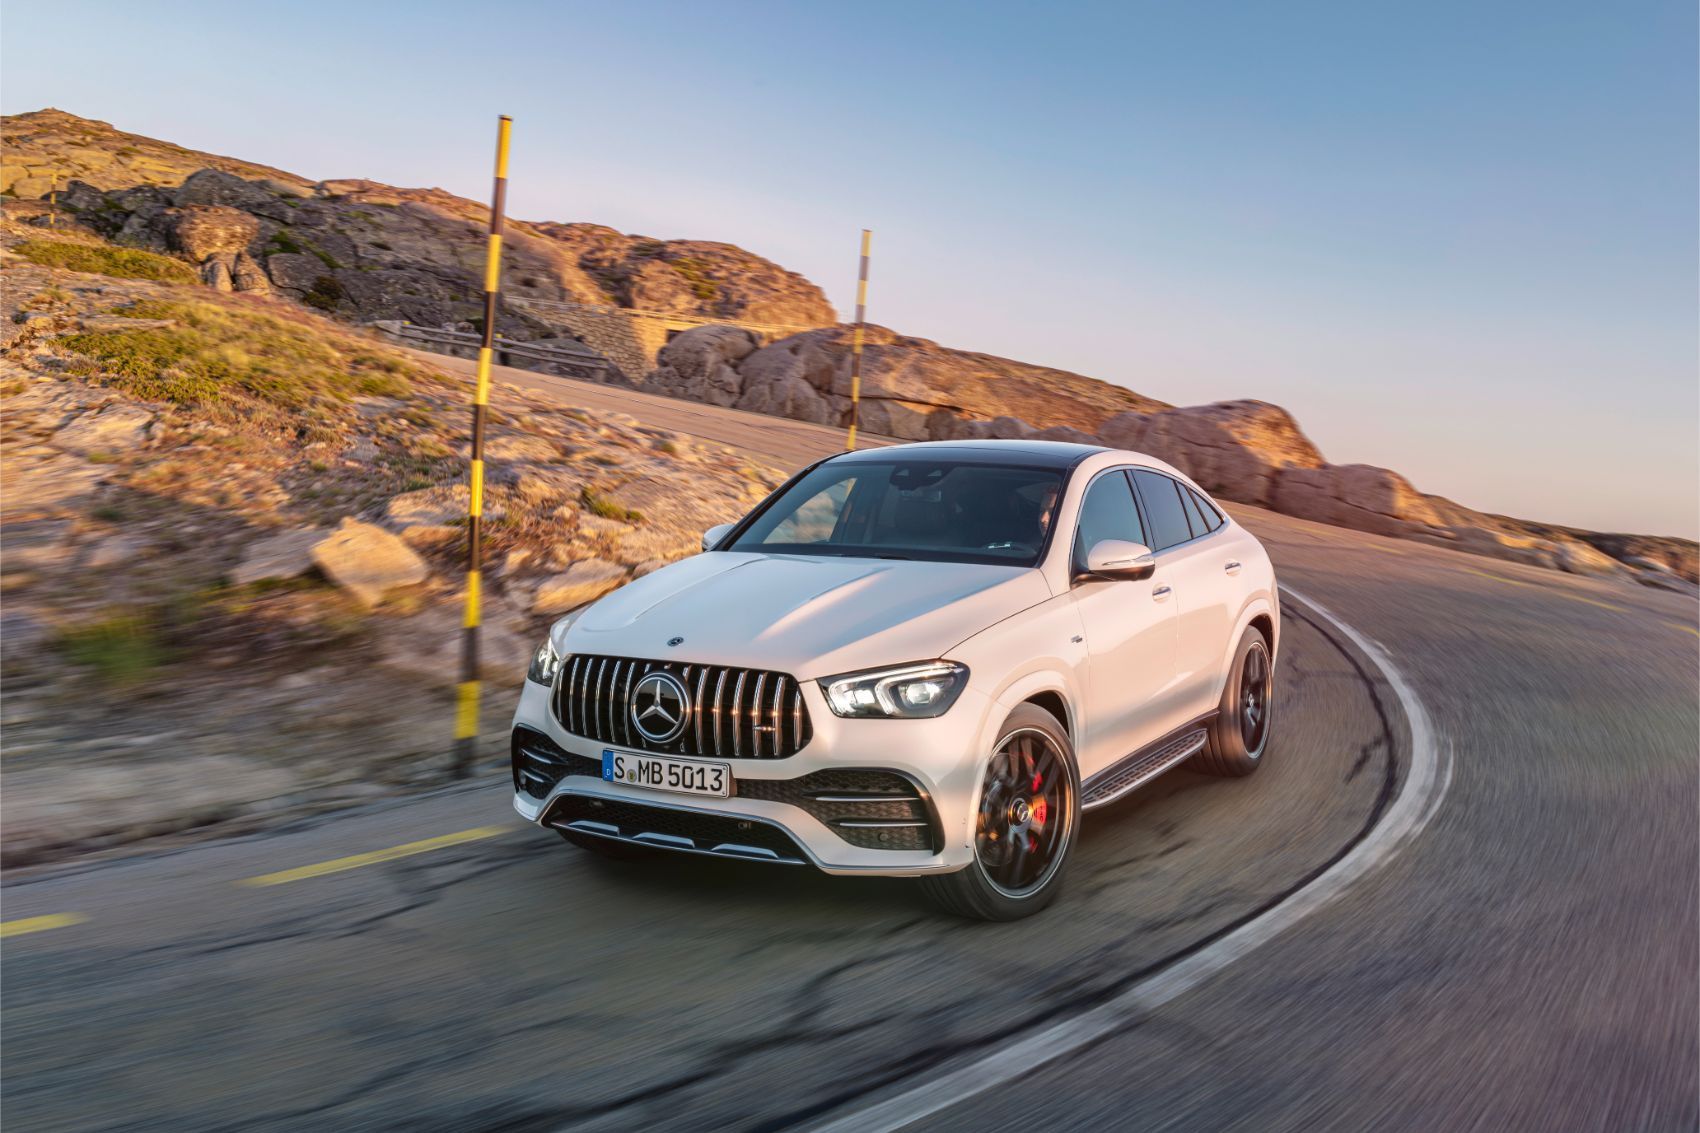 2021 Mercedes-AMG GLE 53 Coupe: Anything But Conventional